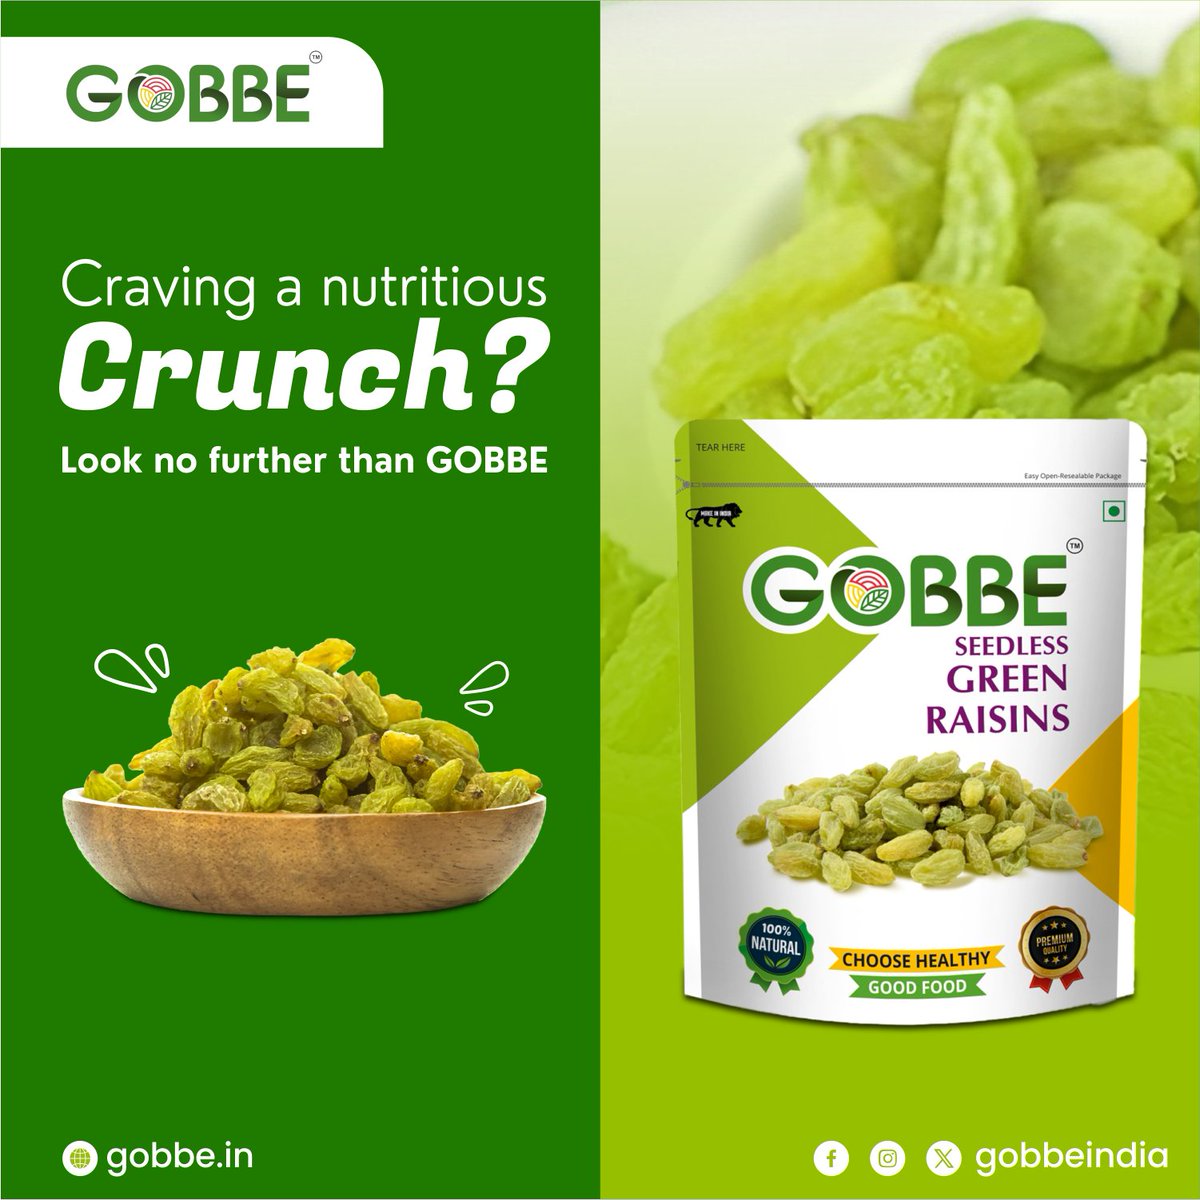 GOBBE offers the finest selection of handpicked dry fruits and seeds to satisfy your snack cravings guilt-free.
Visit the Gobbe store now!!
linktr.ee/gobbeindia

#gobbe #healthconsciousliving #nutritionnest #premiumdryfruits #nutsandseeds #qualityindulgence #banglore #india